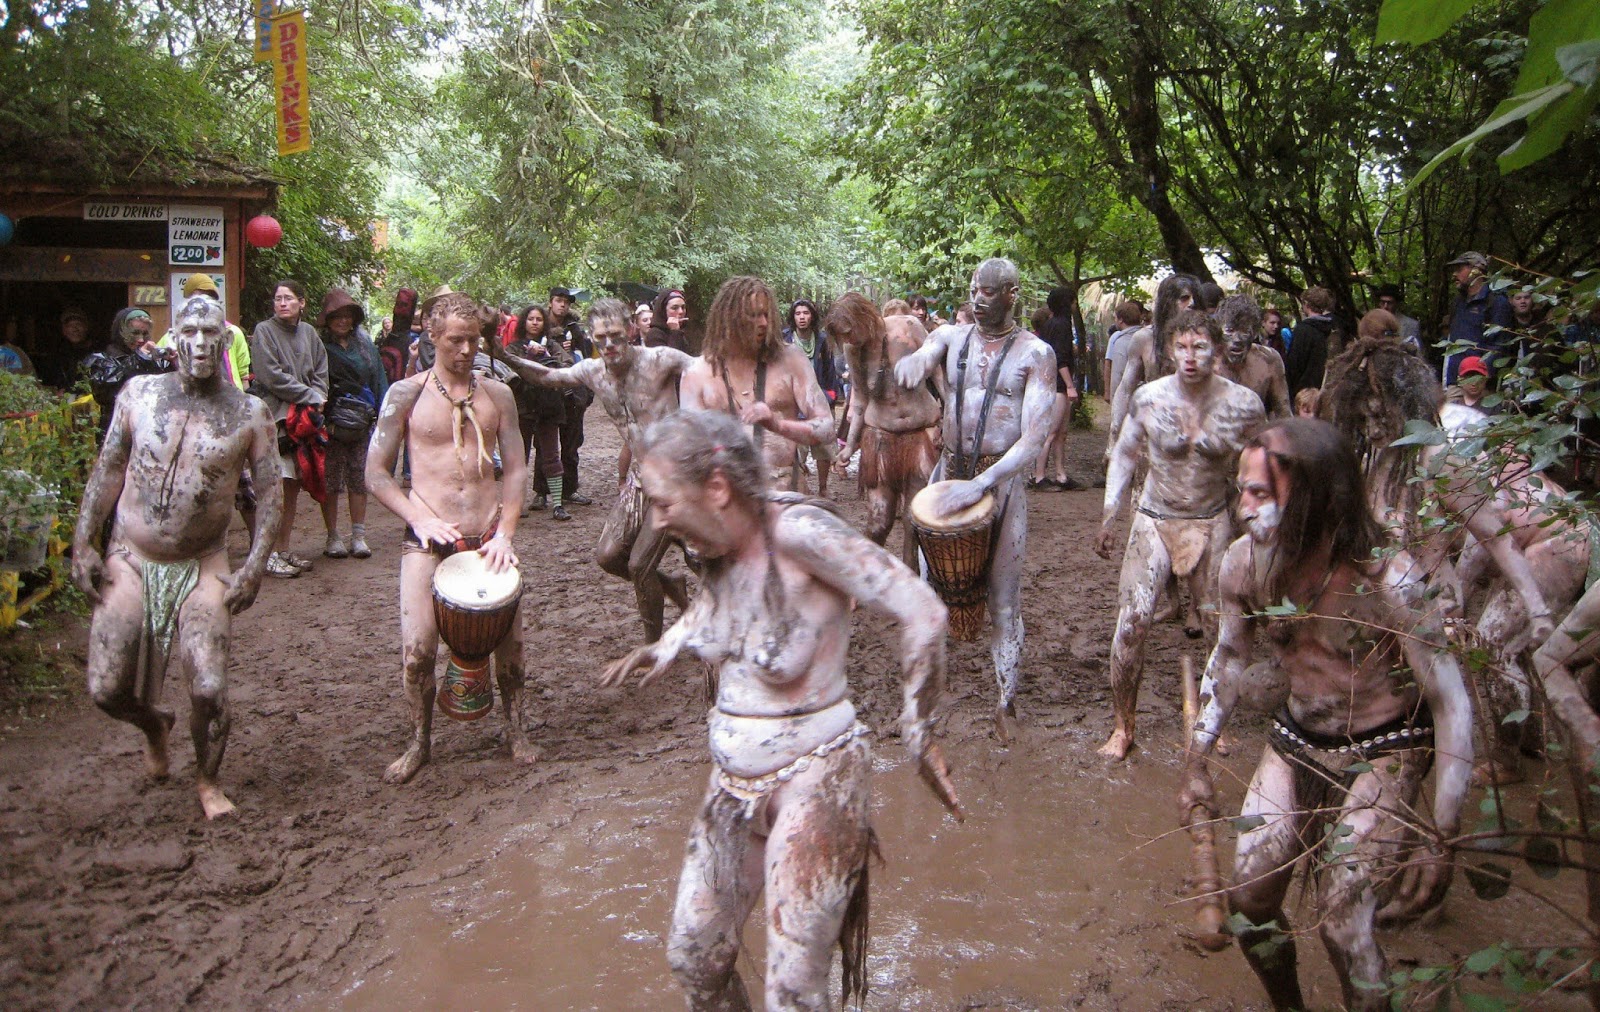 Naked girls - Oregon Country Fair.